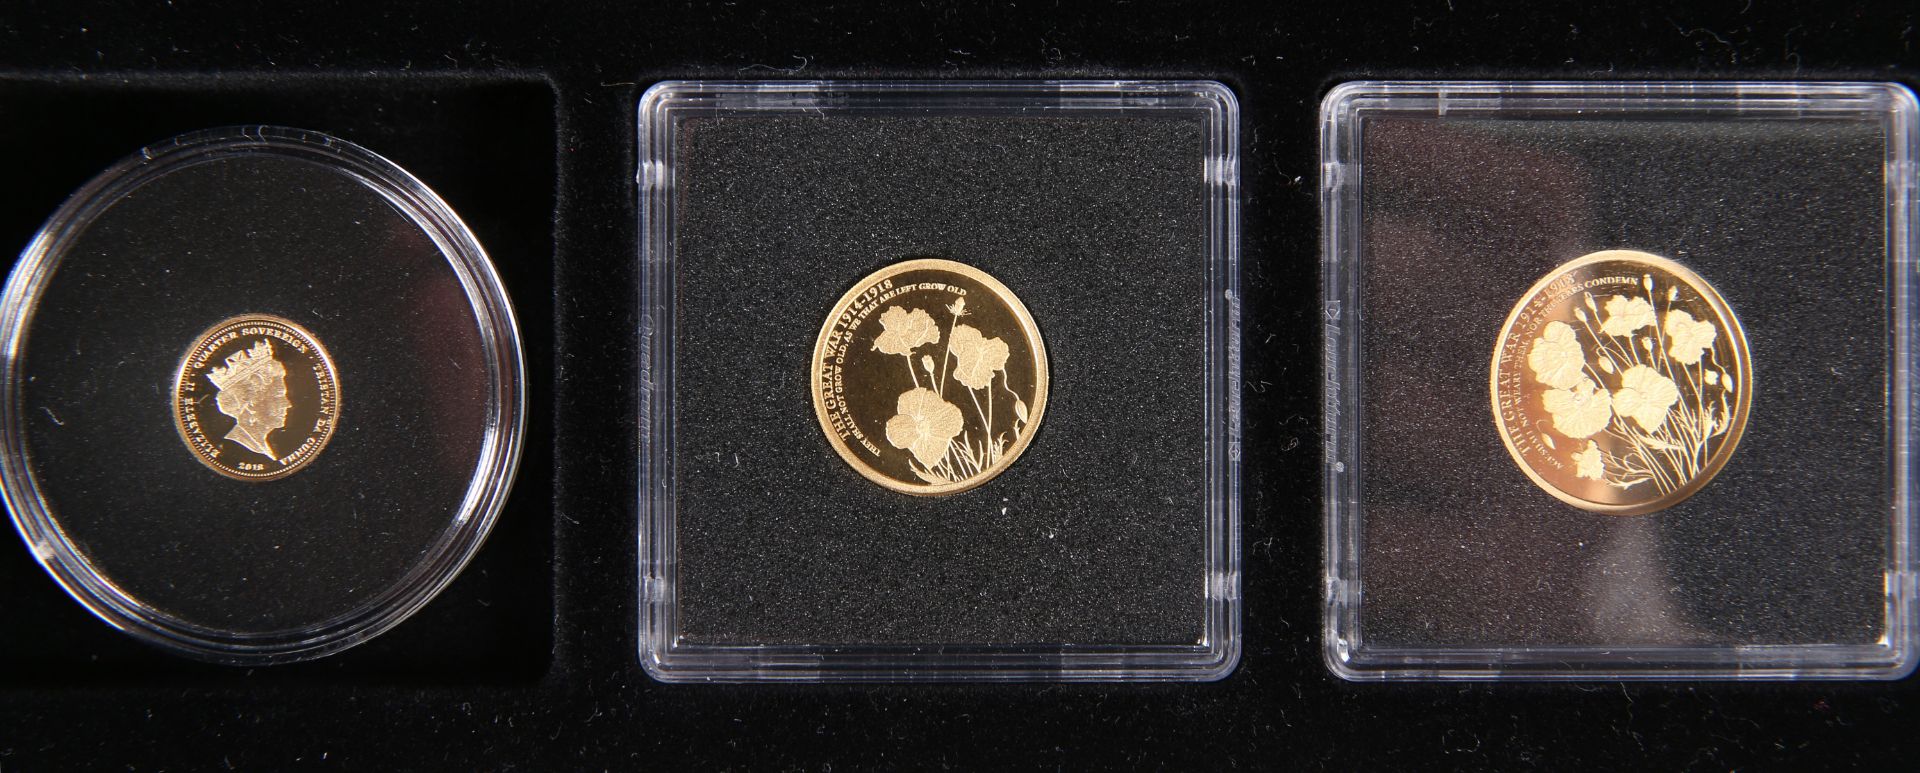 A GOLD PROOF SOVEREIGN SET, "THE OFFICIAL LEST WE FORGET GOLD SOVEREIGN SET", comprising a full,